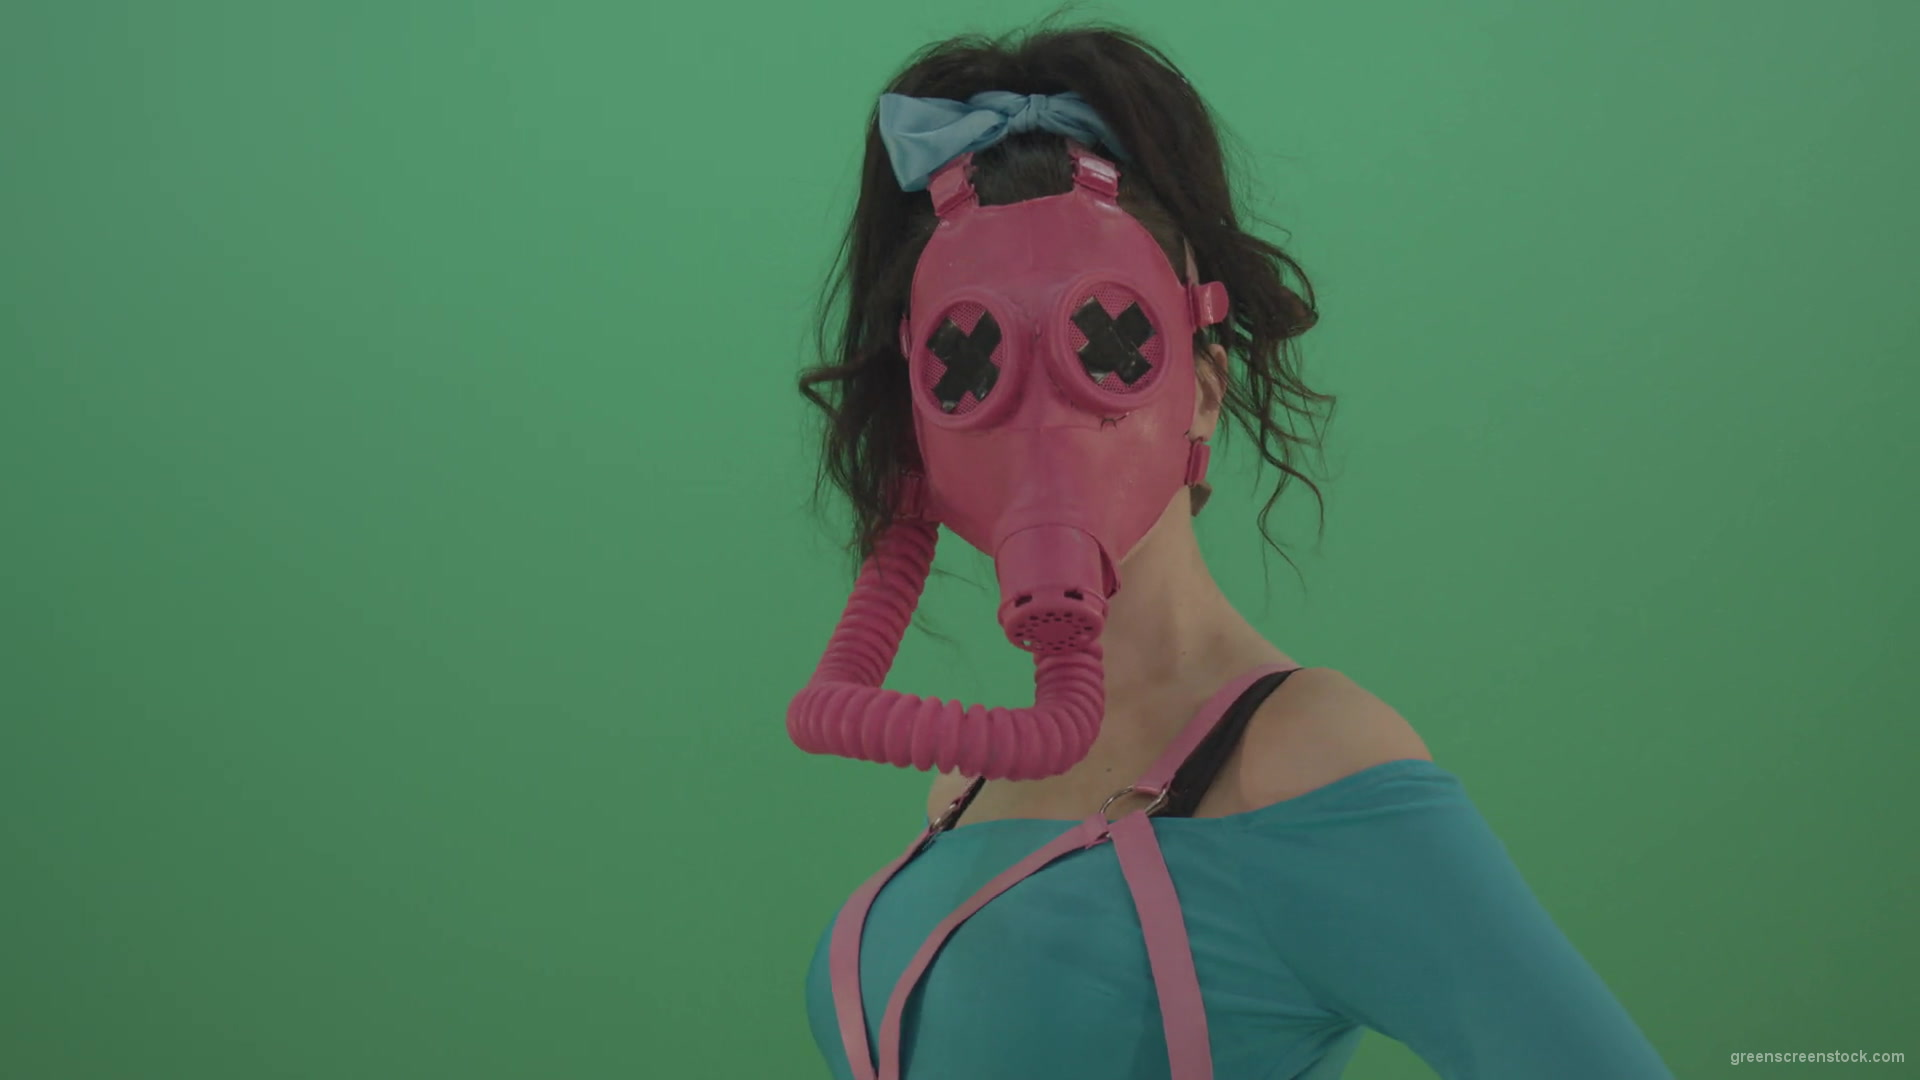 Pink-head-in-Gas-Mask-moving-Go-Go-Dance-isolated-on-green-screen-4K-Video-Footage-1920_008 Green Screen Stock